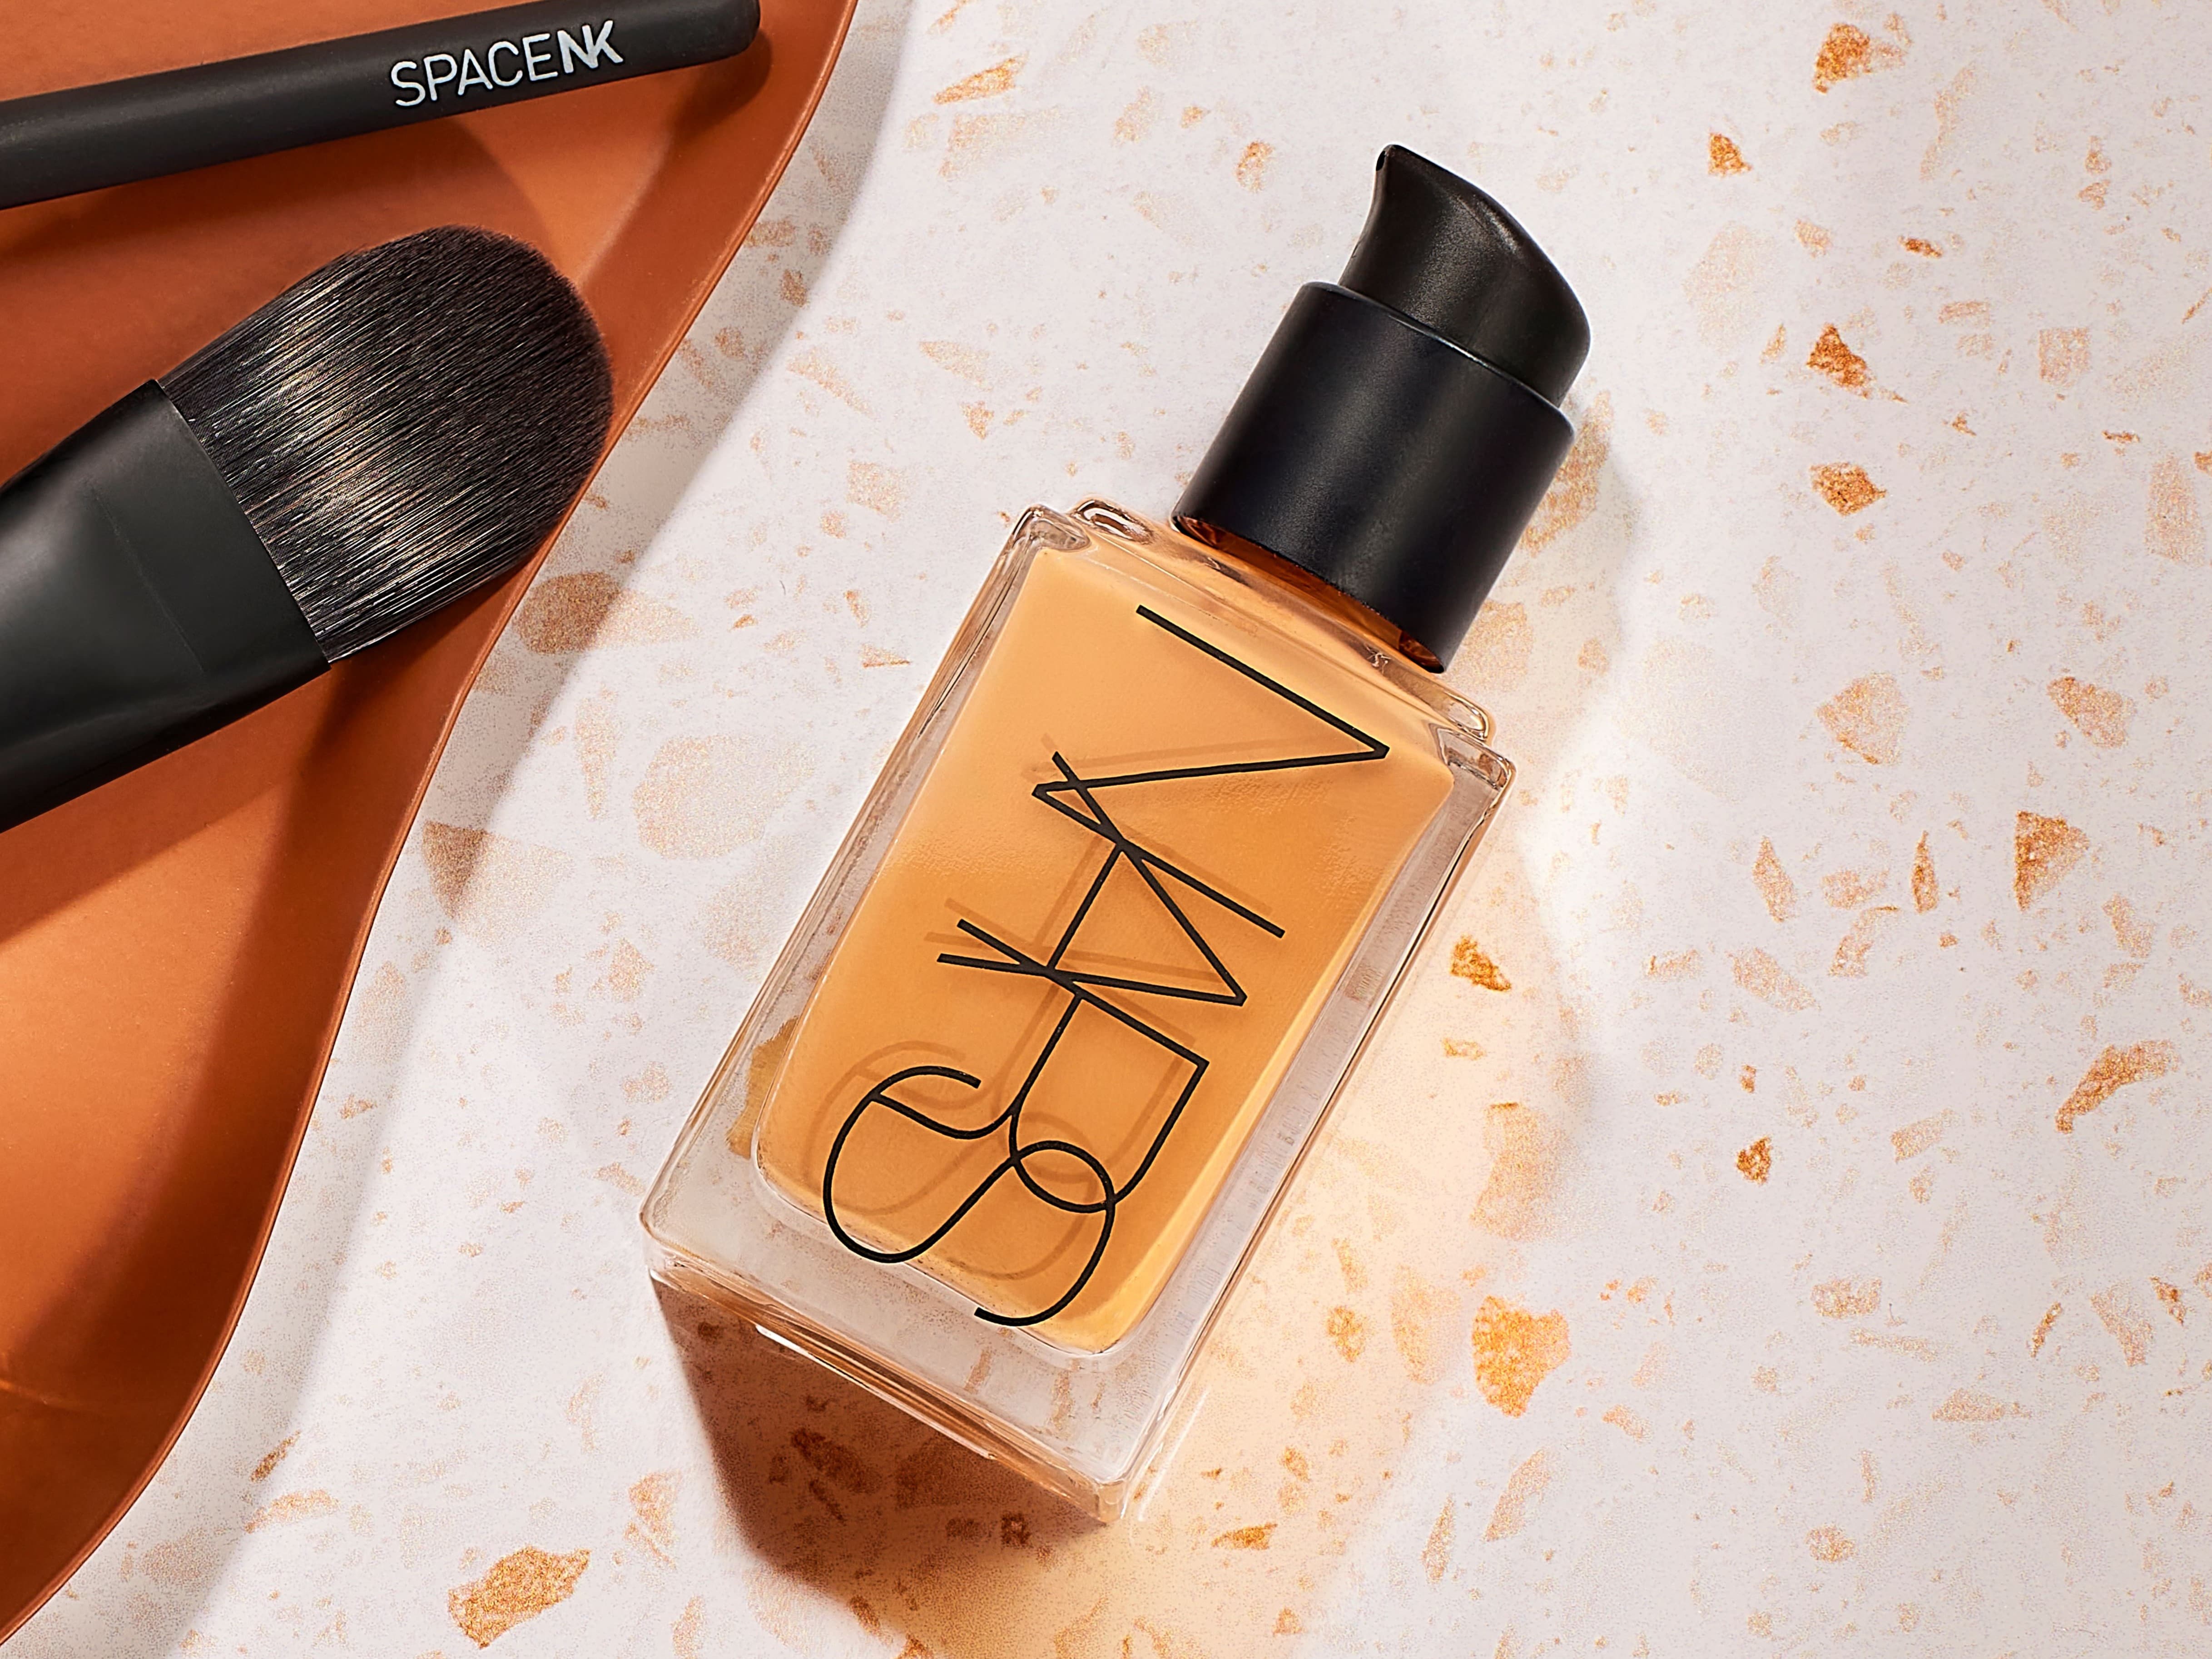 NARS Light Reflecting Foundation review | Space NK